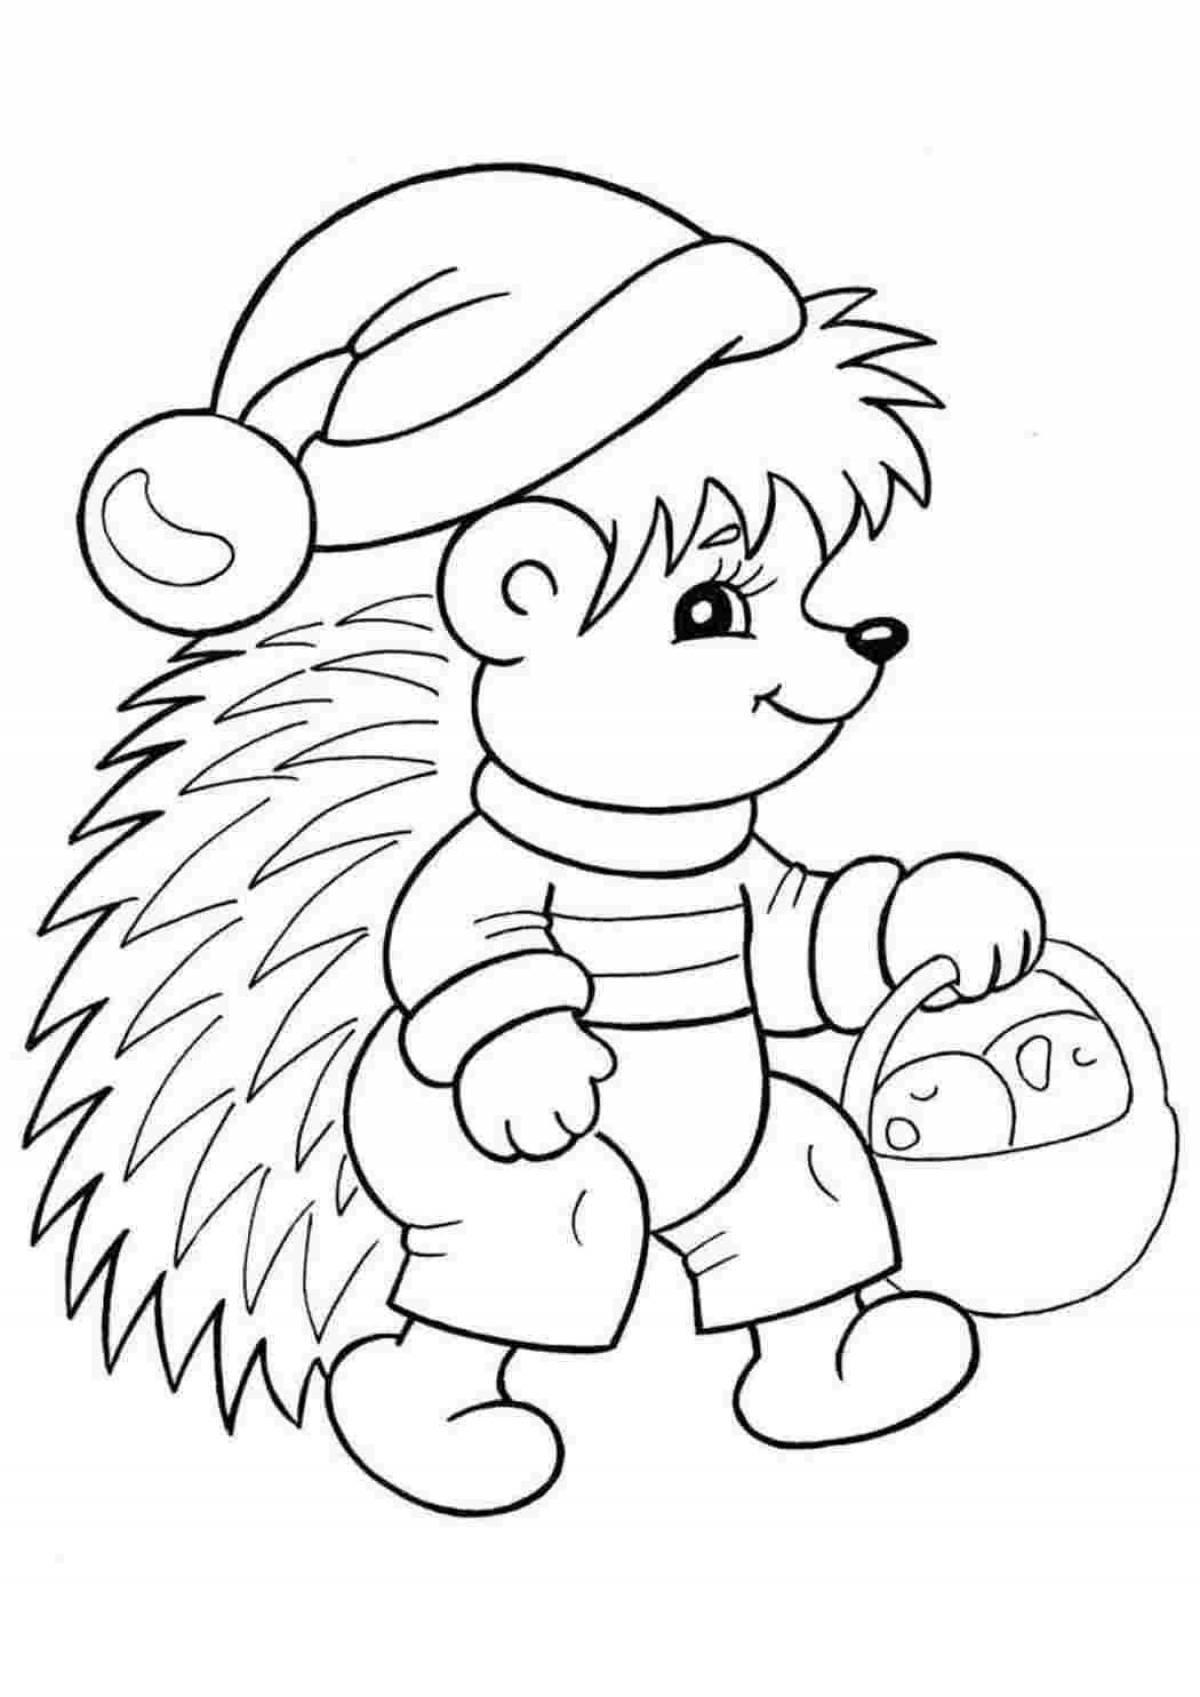 Naughty hedgehog coloring page